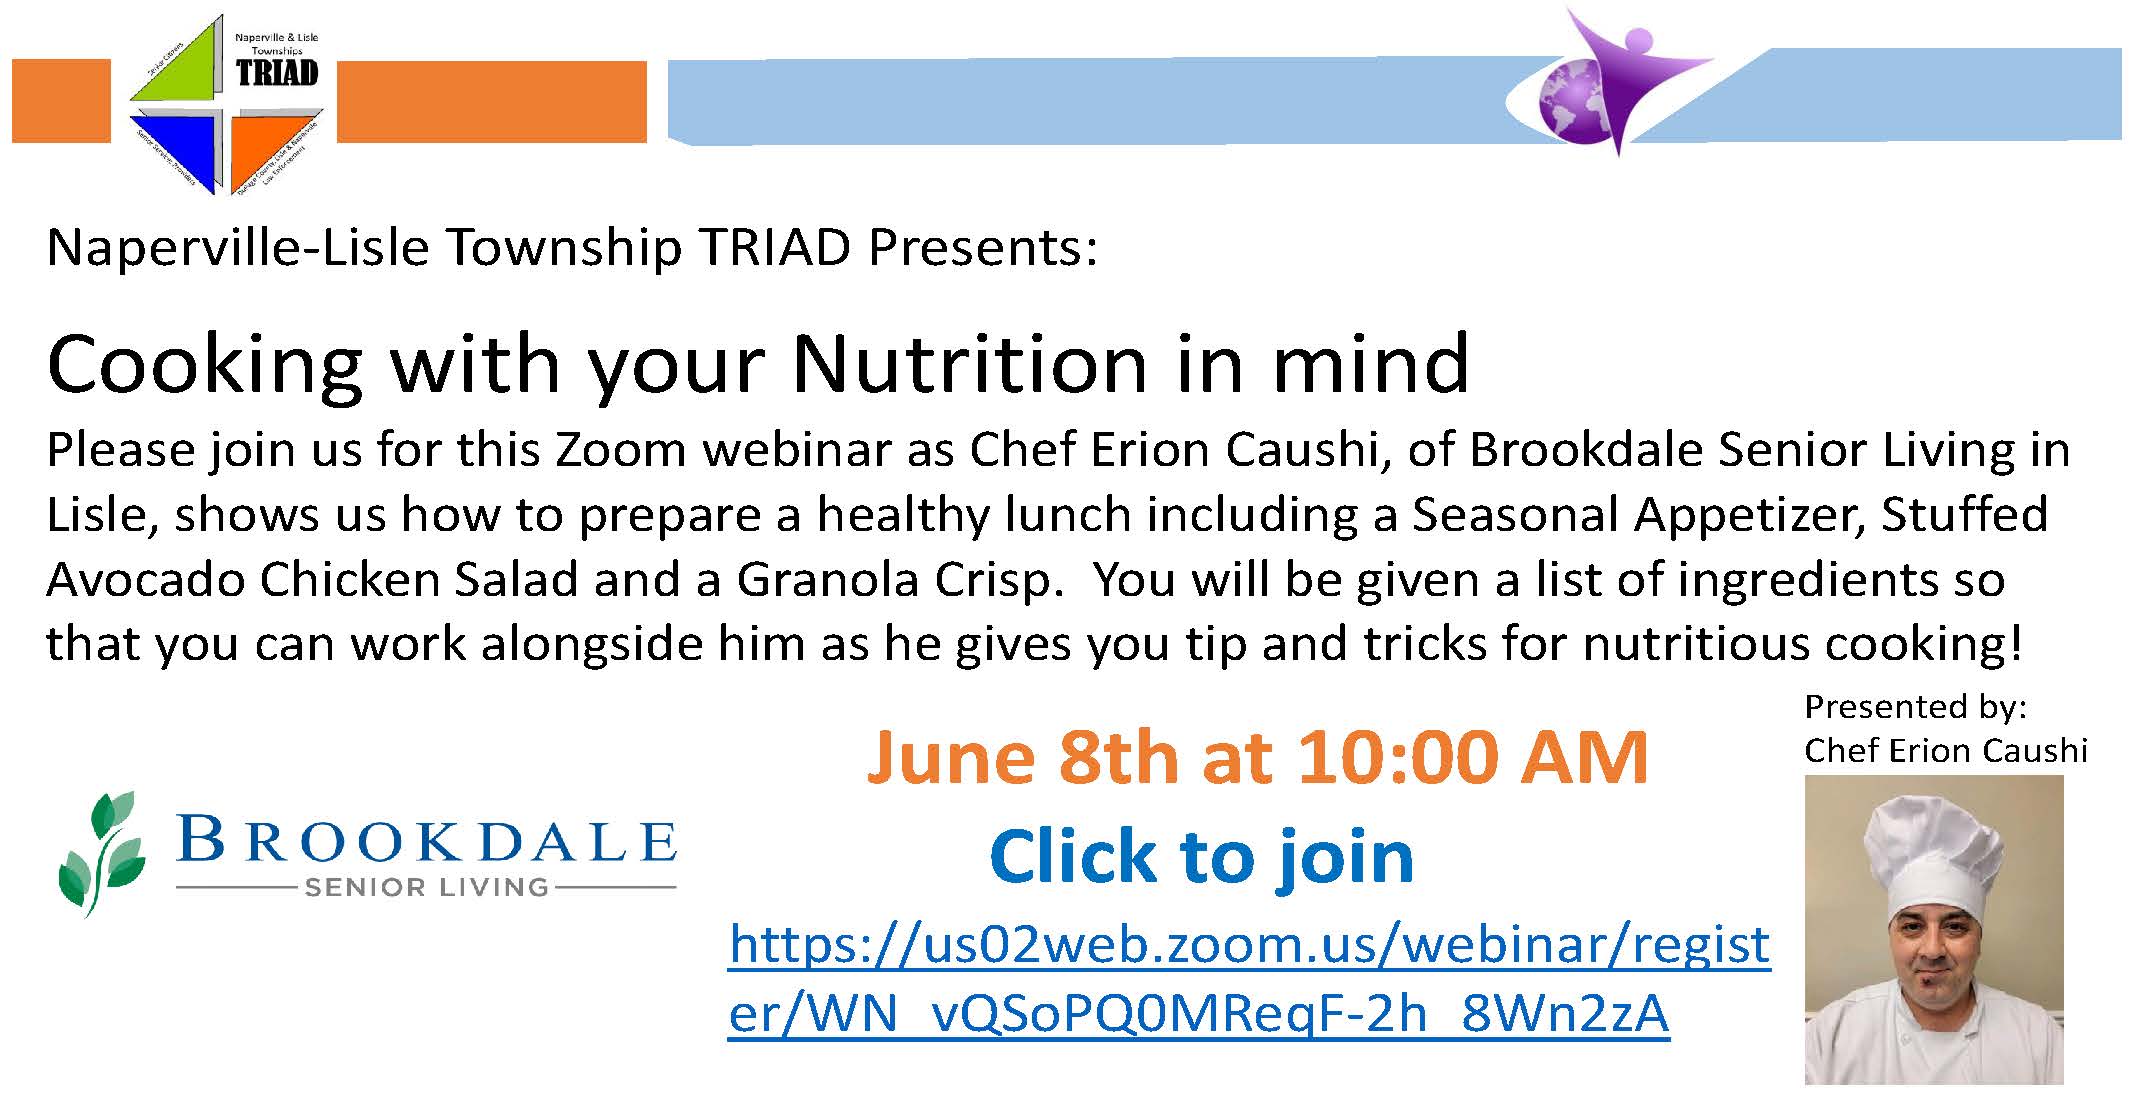 cooking with nutrition in mind event flyer